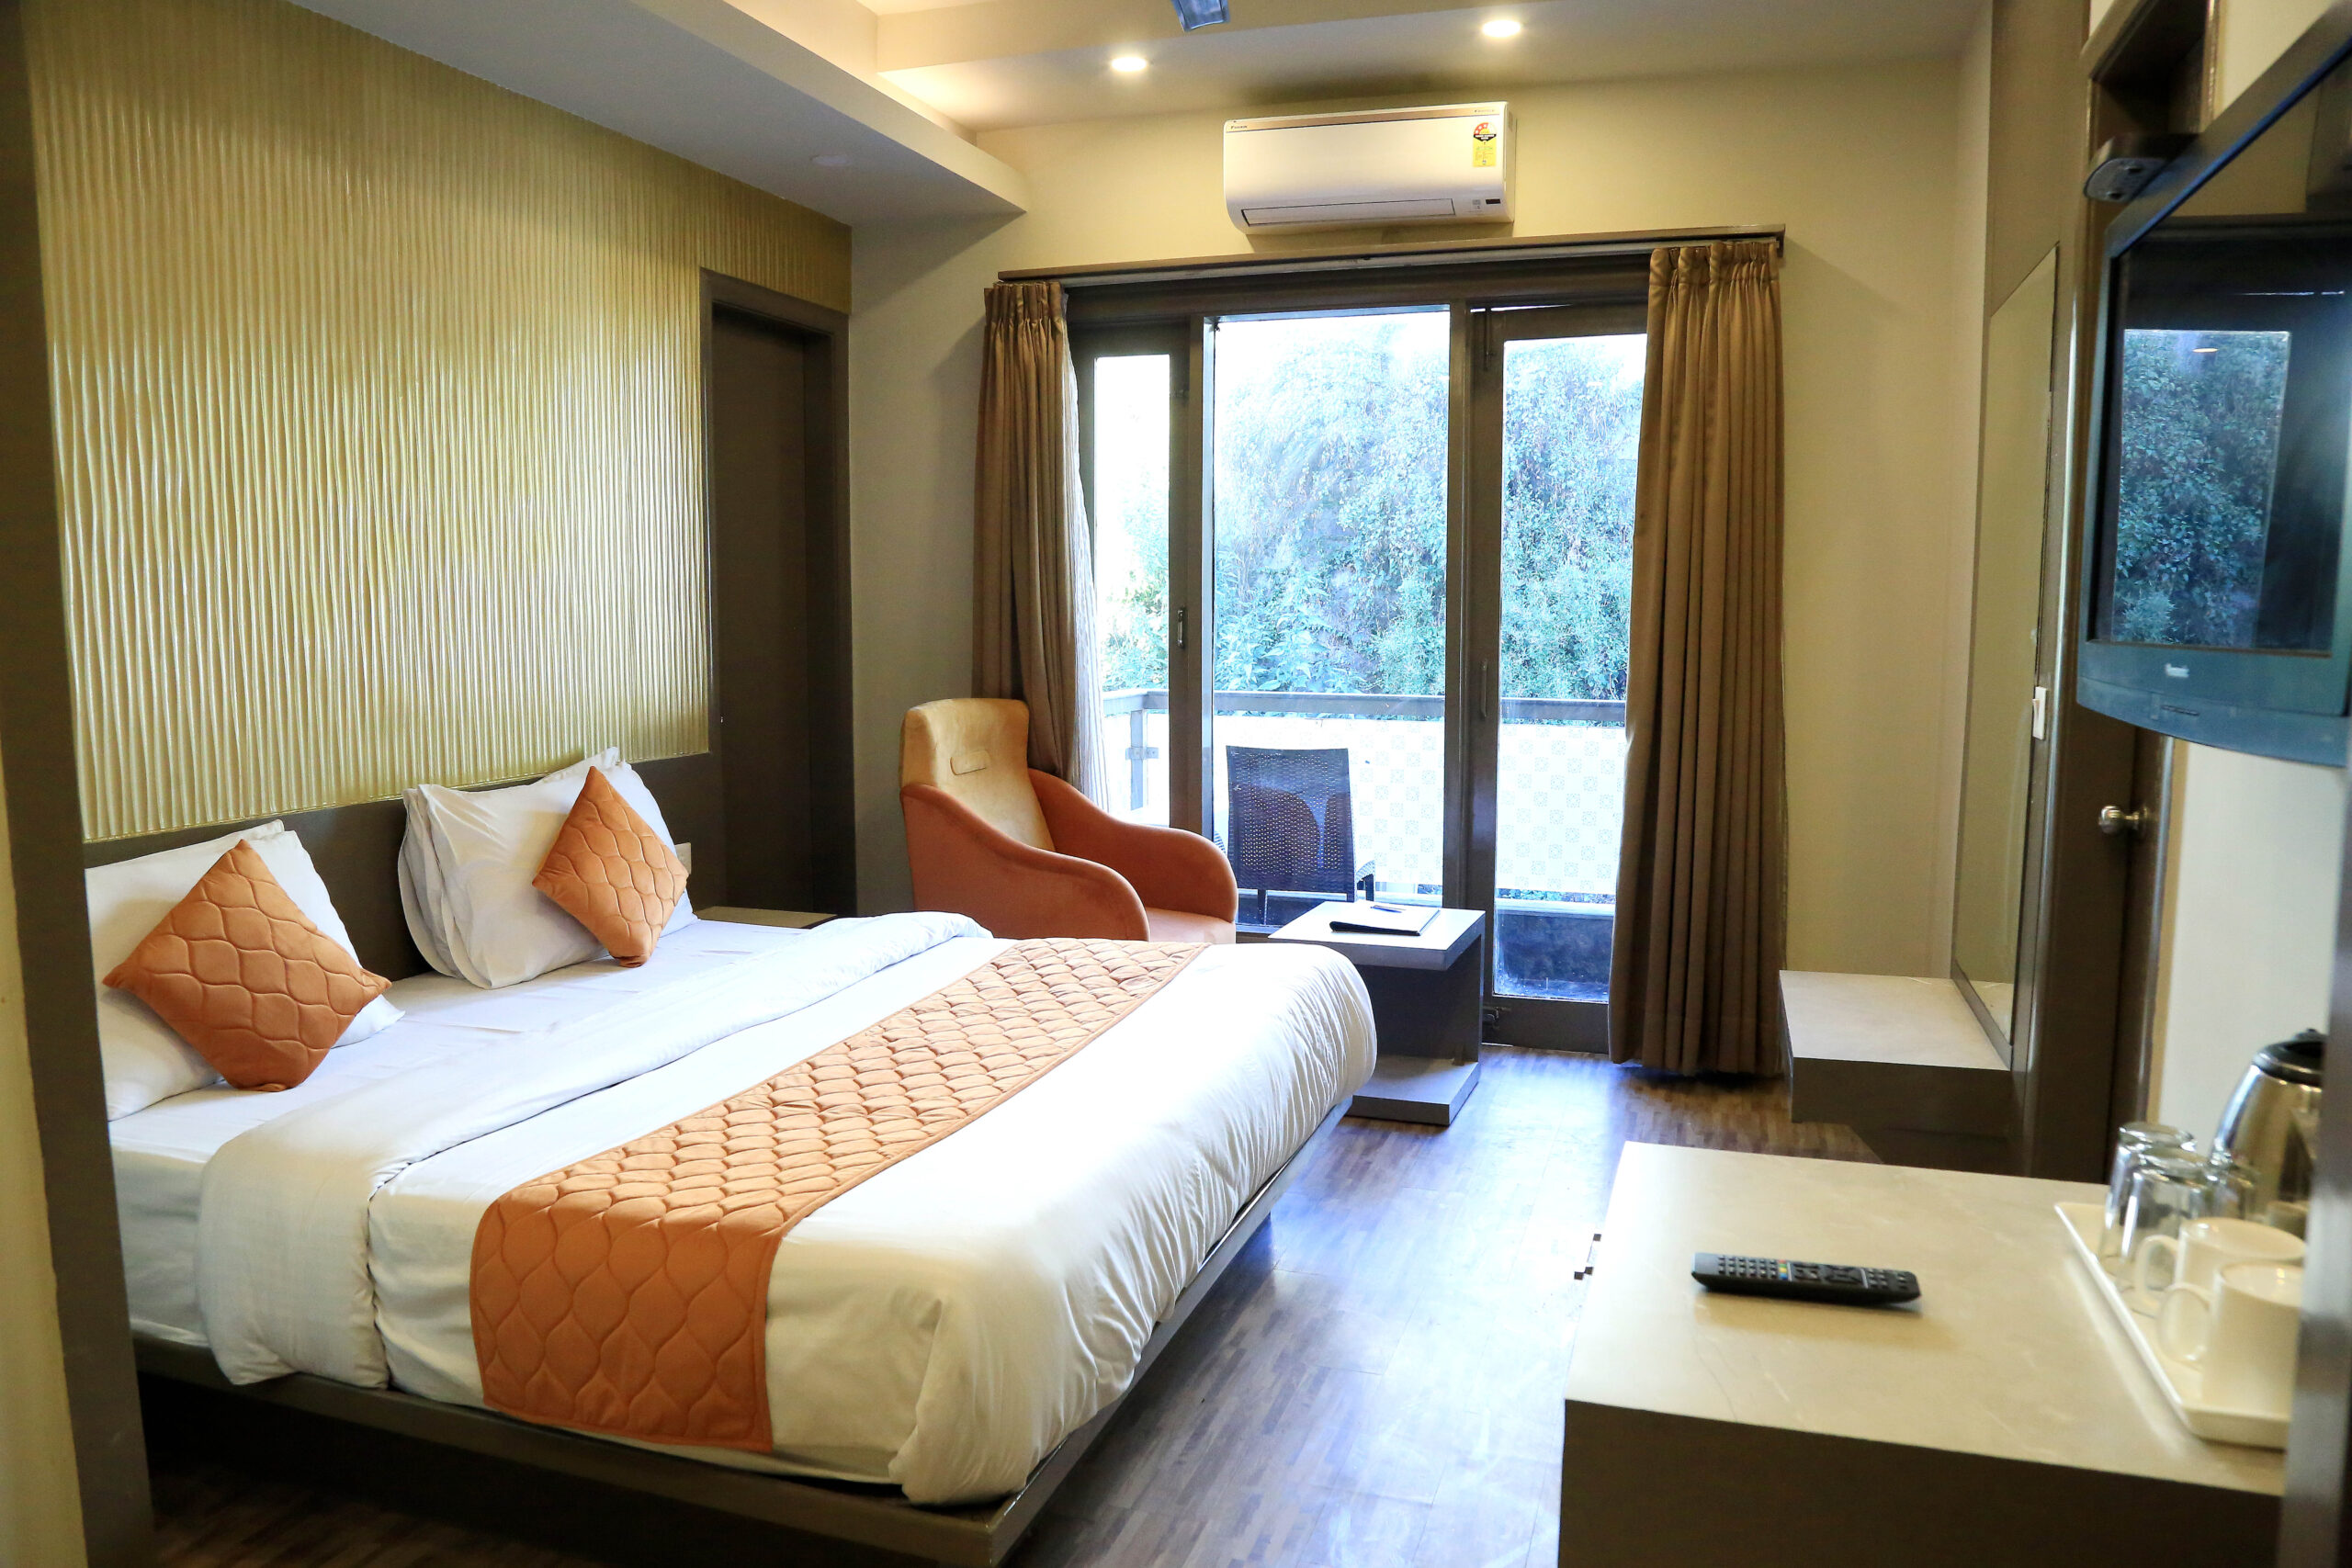 Suba Group of Hotels launches ‘Comfort Inn silver Arch’, Mussoorie